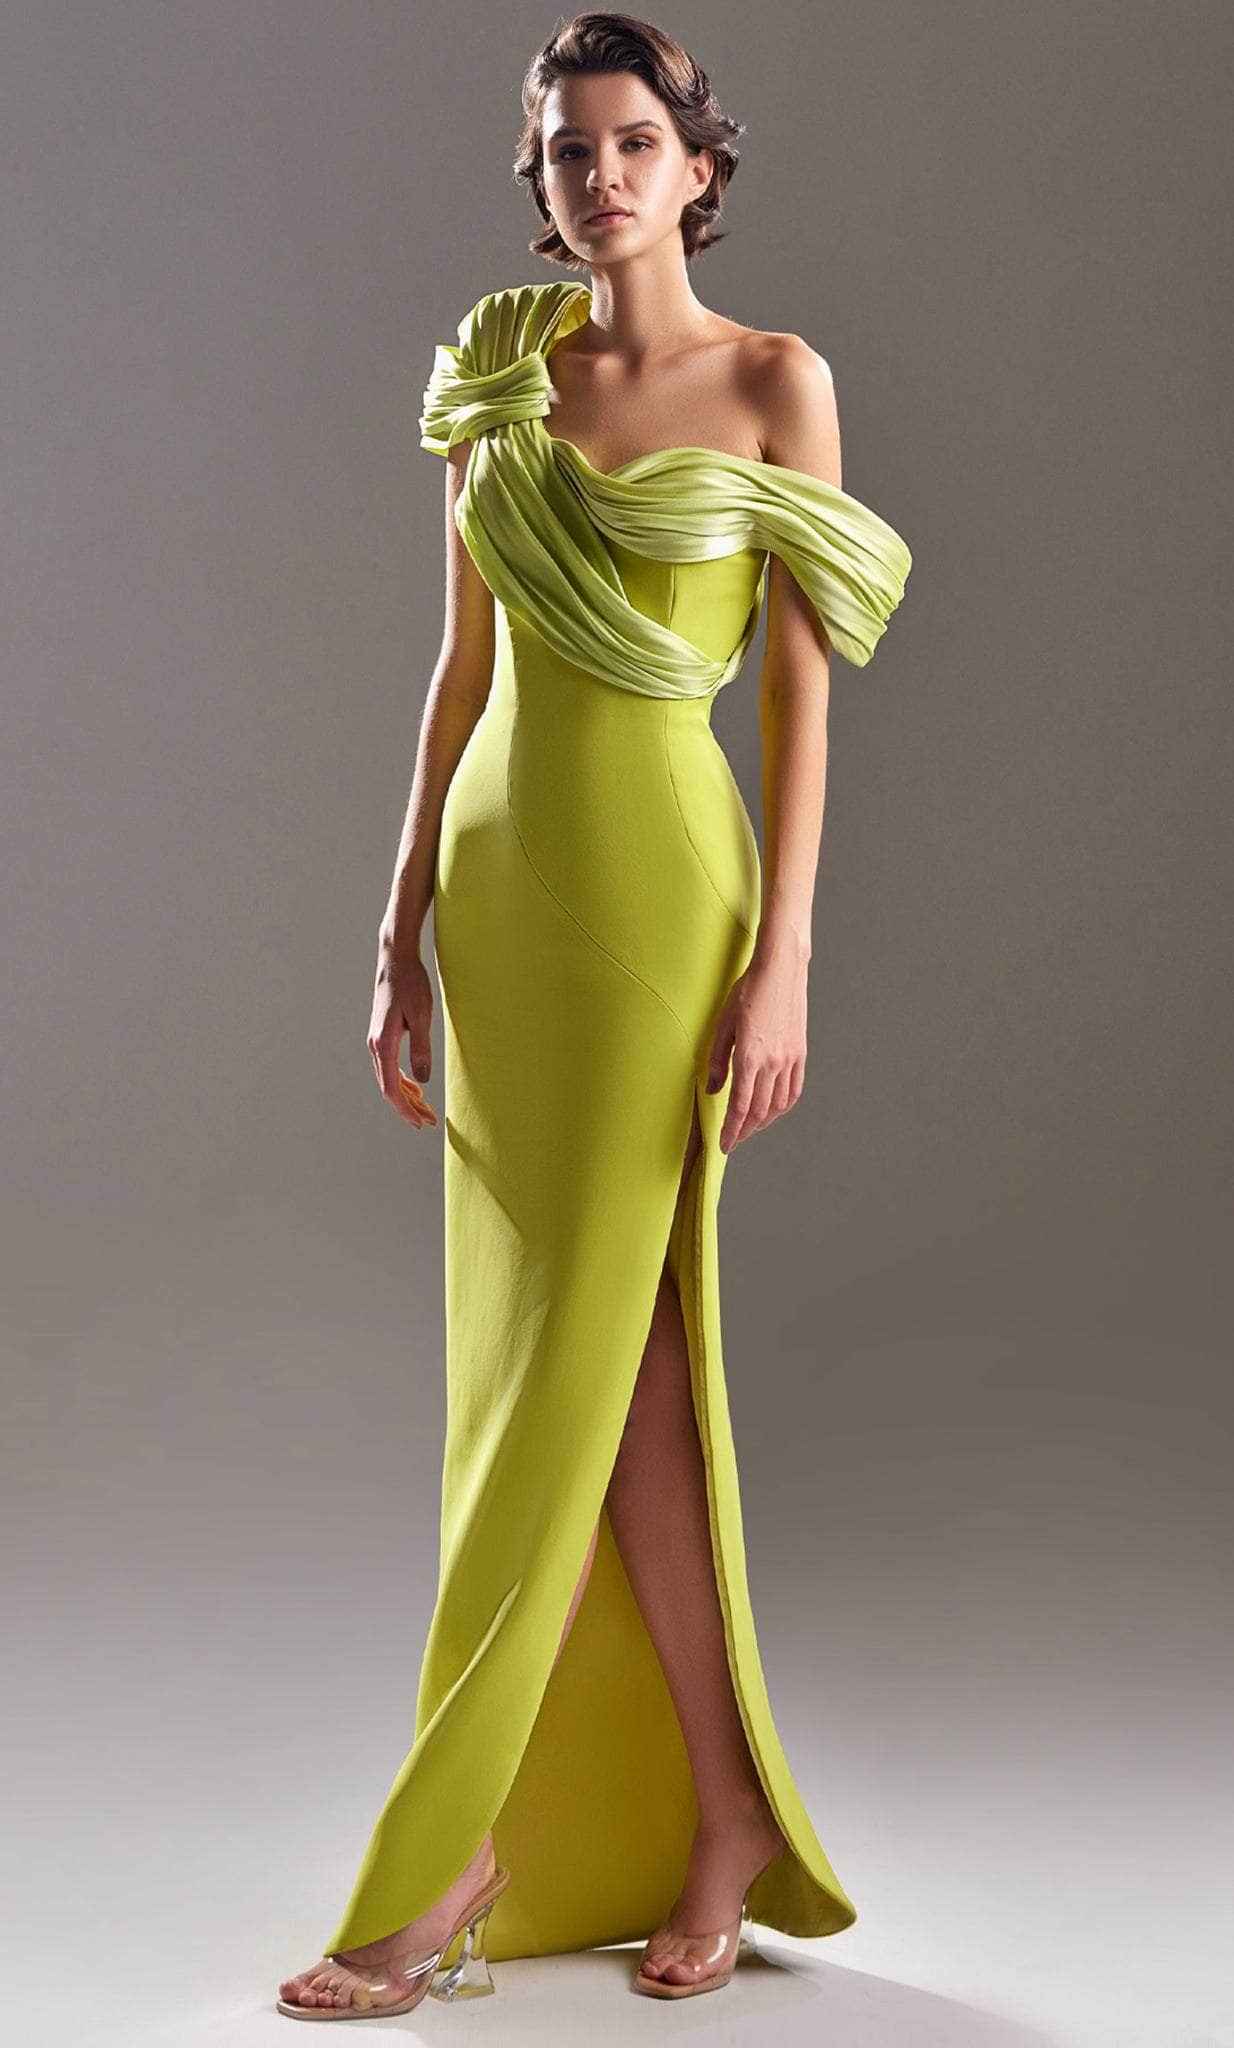 Image of MNM Couture G1518 - Draped Asymmetric Evening Dress